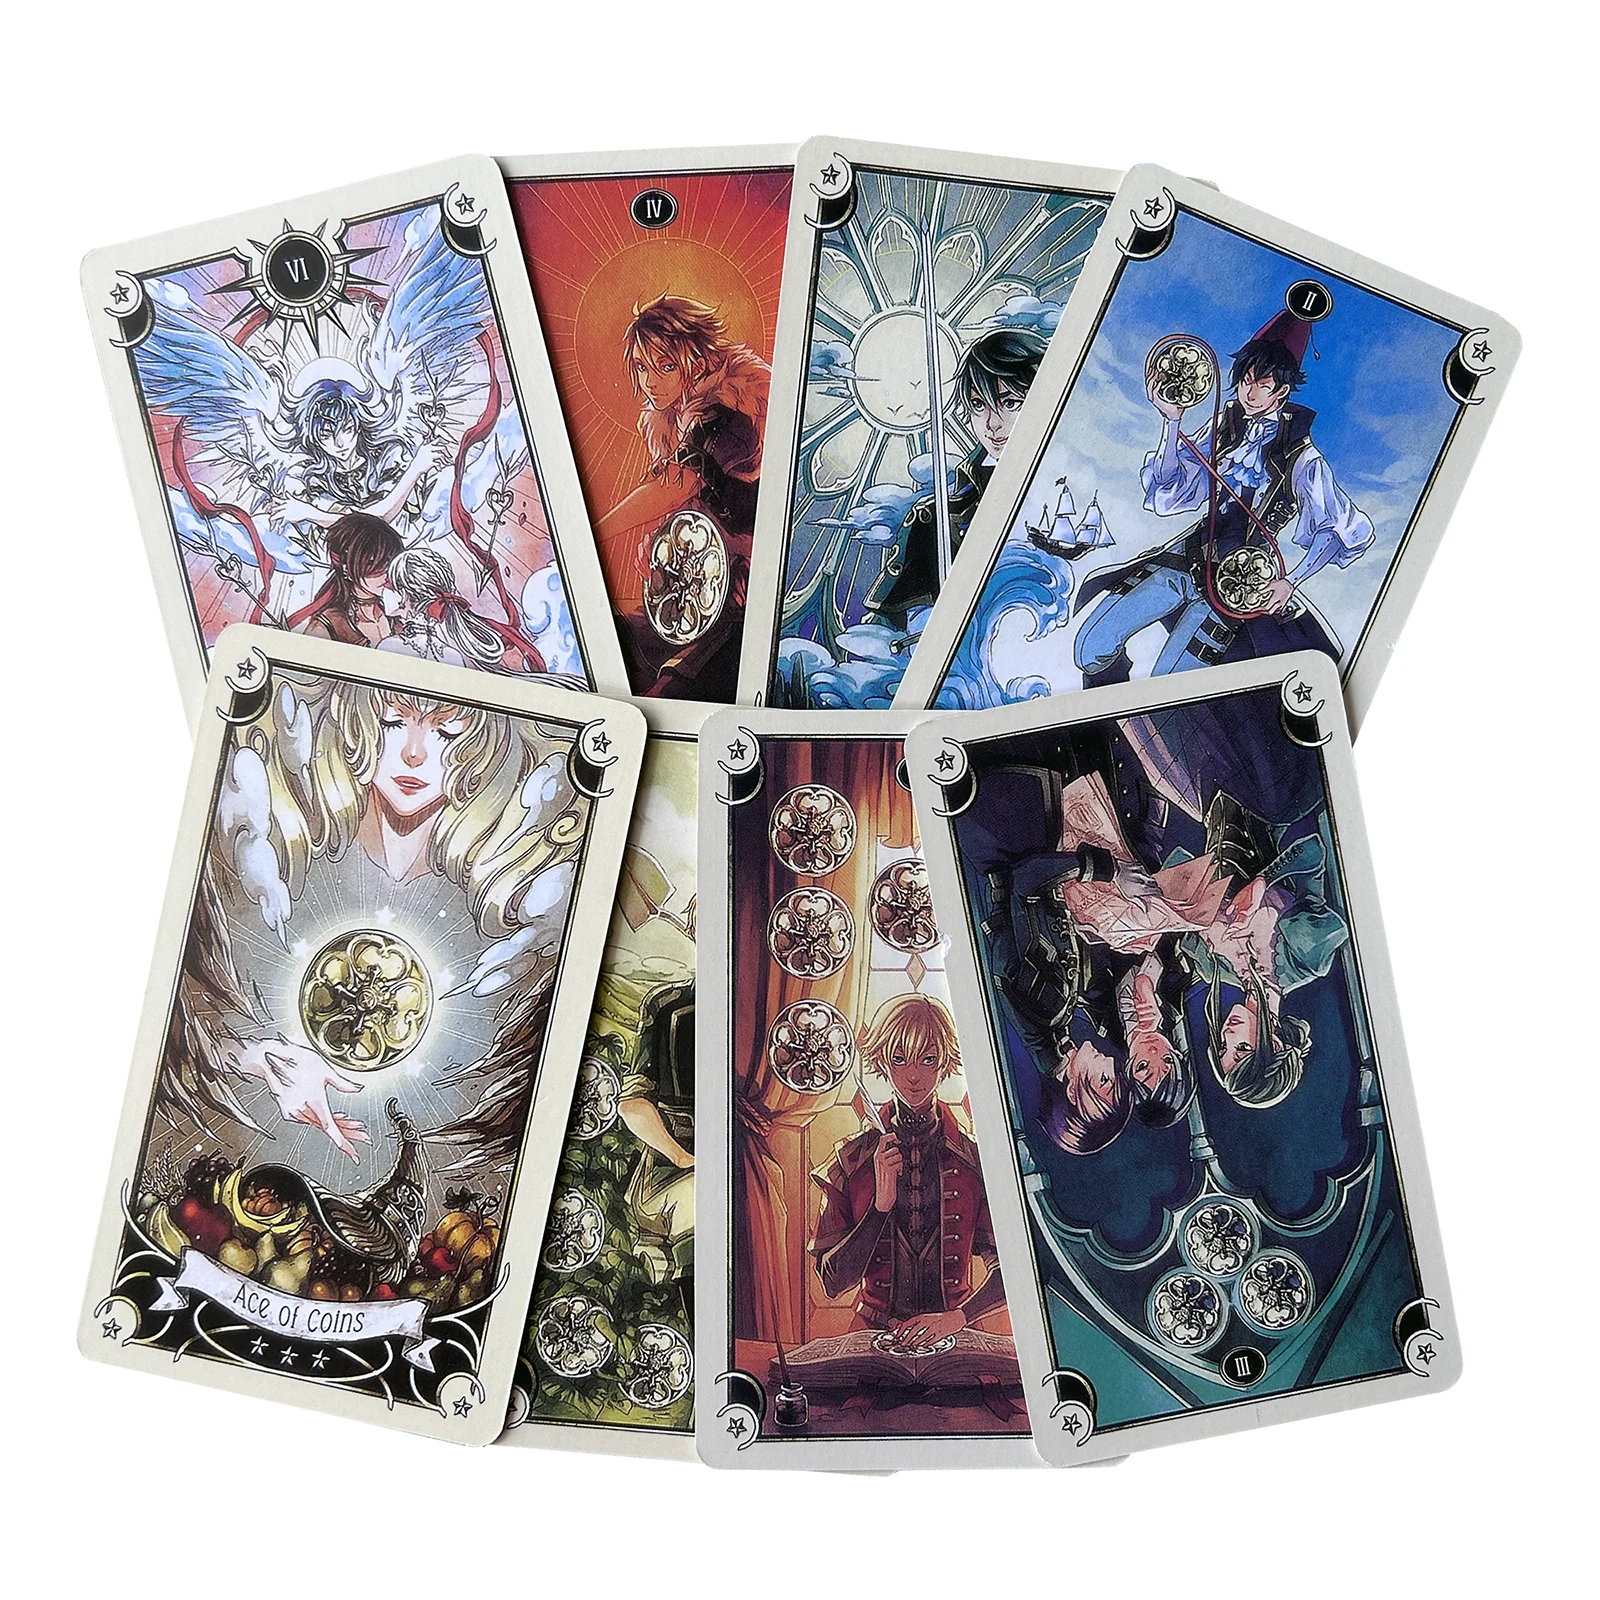 Hot Sell Tarot Cards 12x7 Board Game for Divination Personal Use Tarot Deck Party Games Full English Table Game Outdoor Camping. yo cho rose boutonniere bride wrist corsages artificial silk flowers bridegroom wedding meeting party unique personal adornments